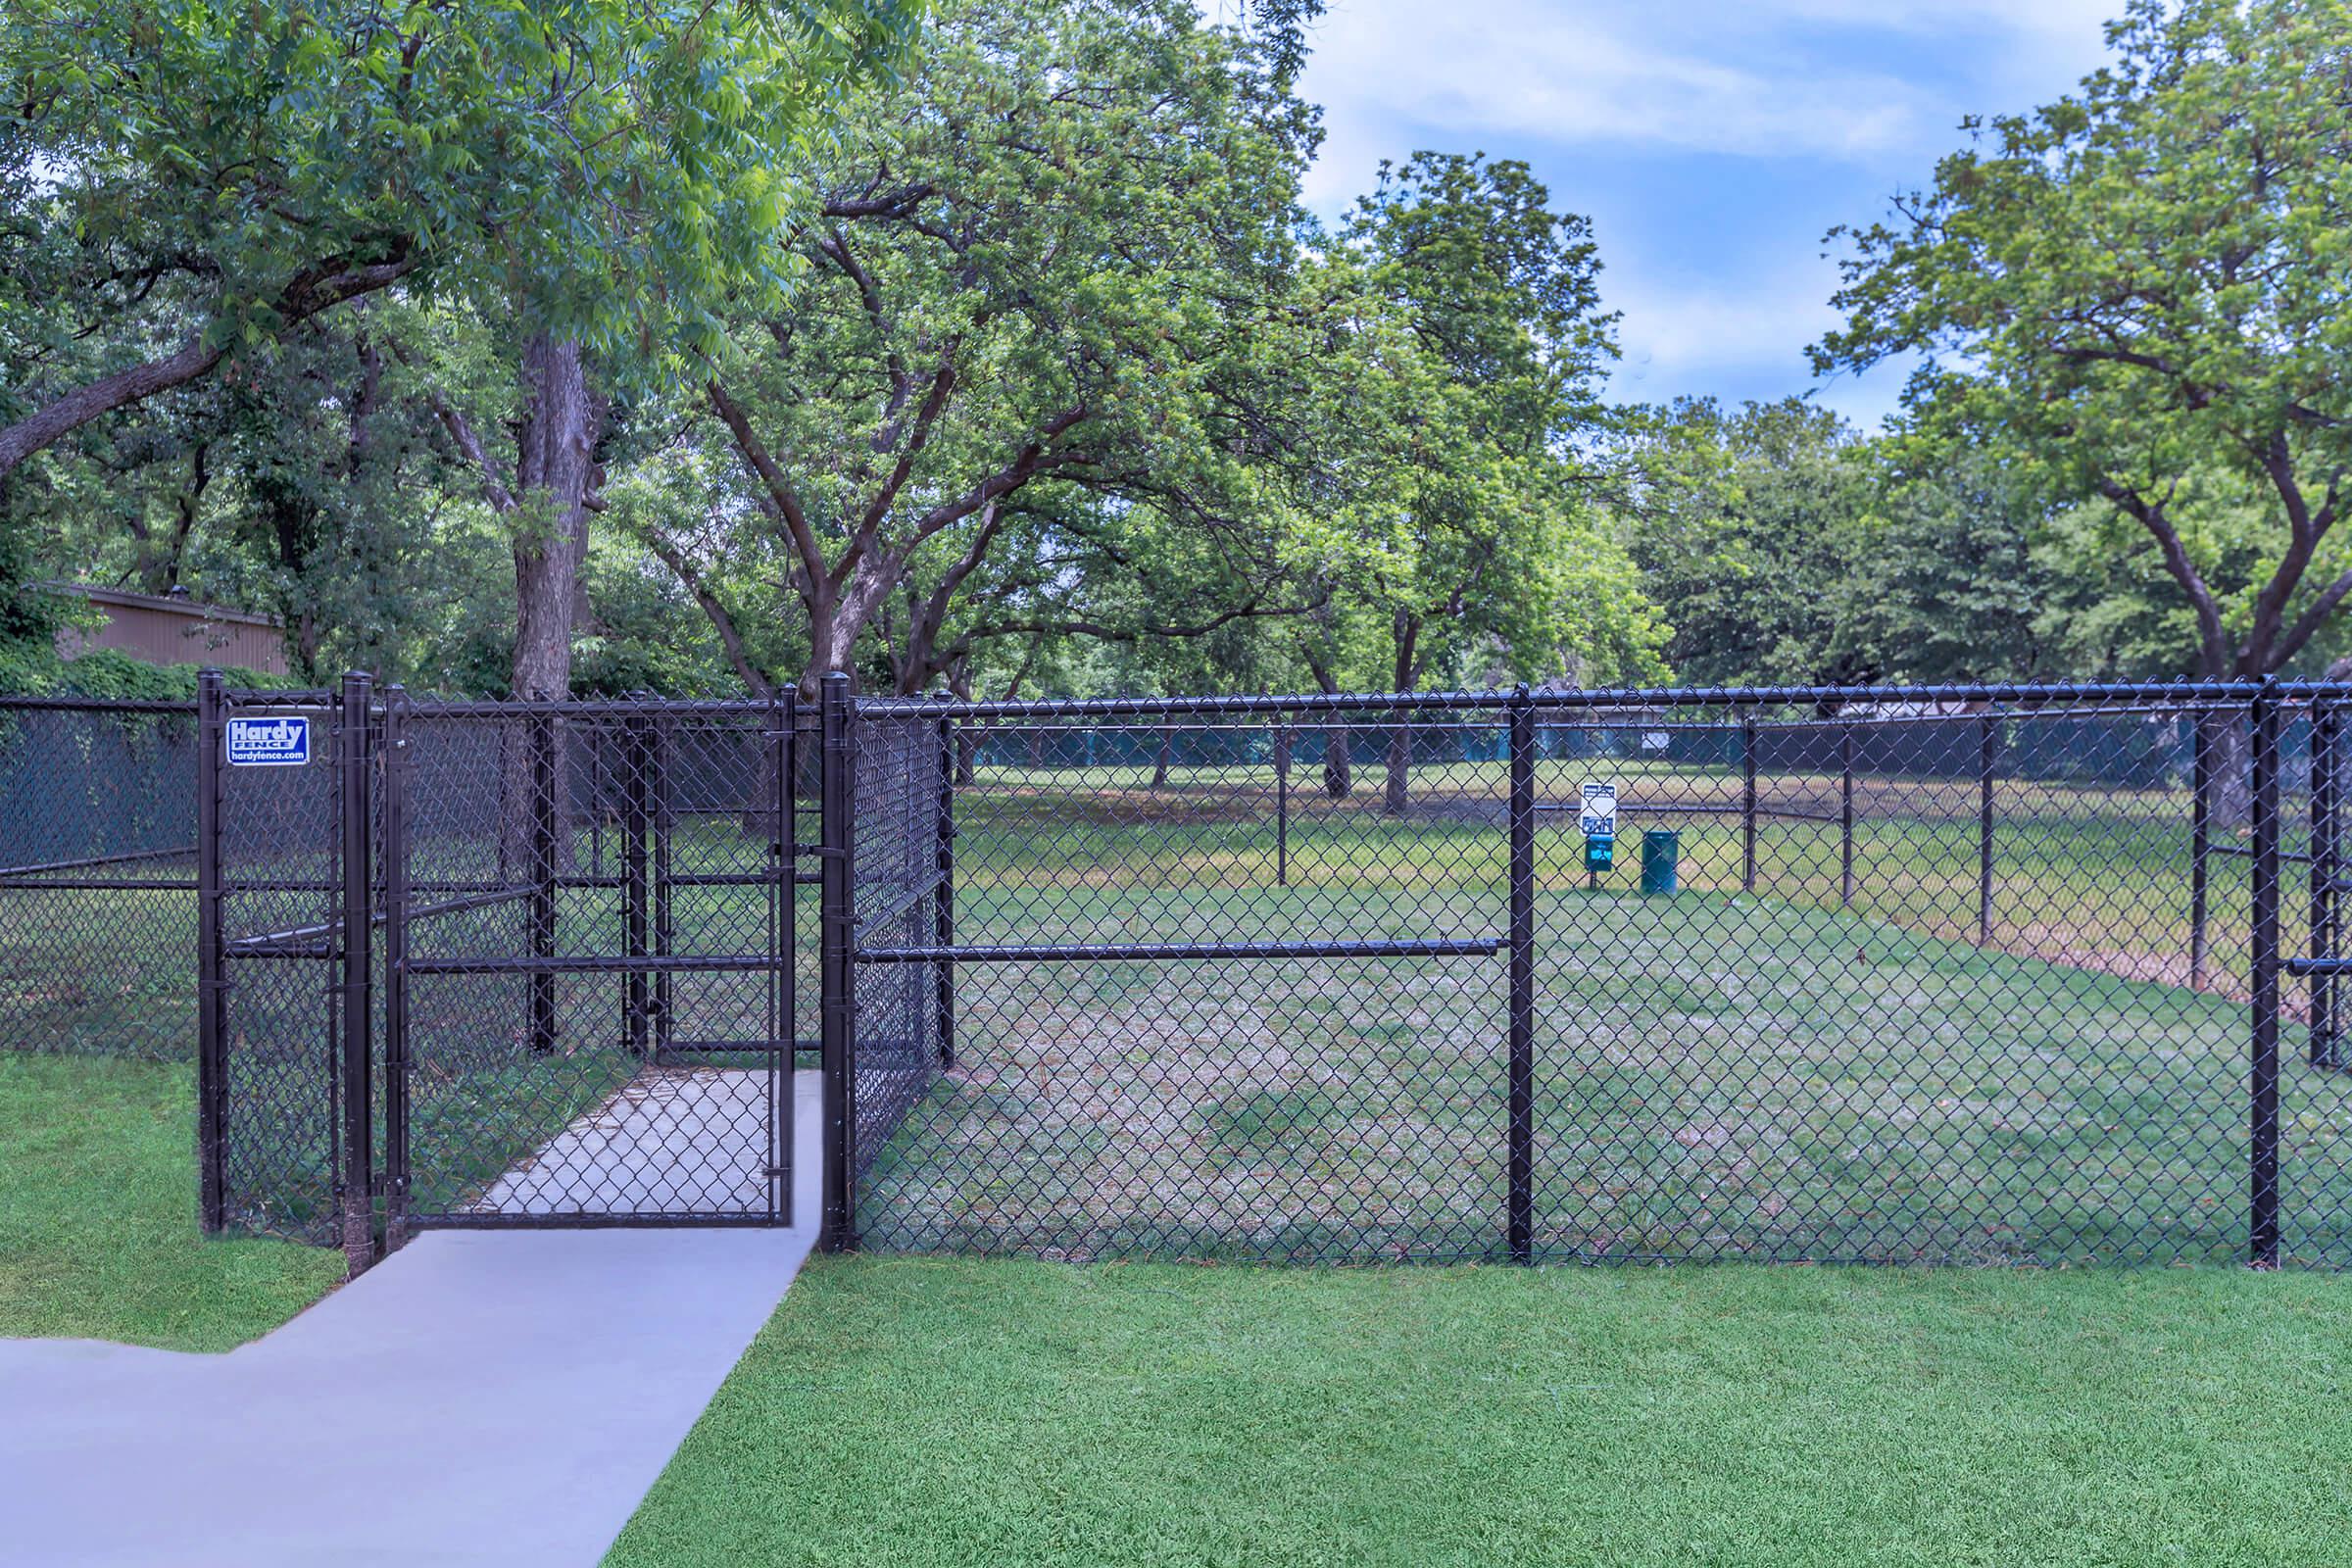 a fenced in grassy area with trees in the background